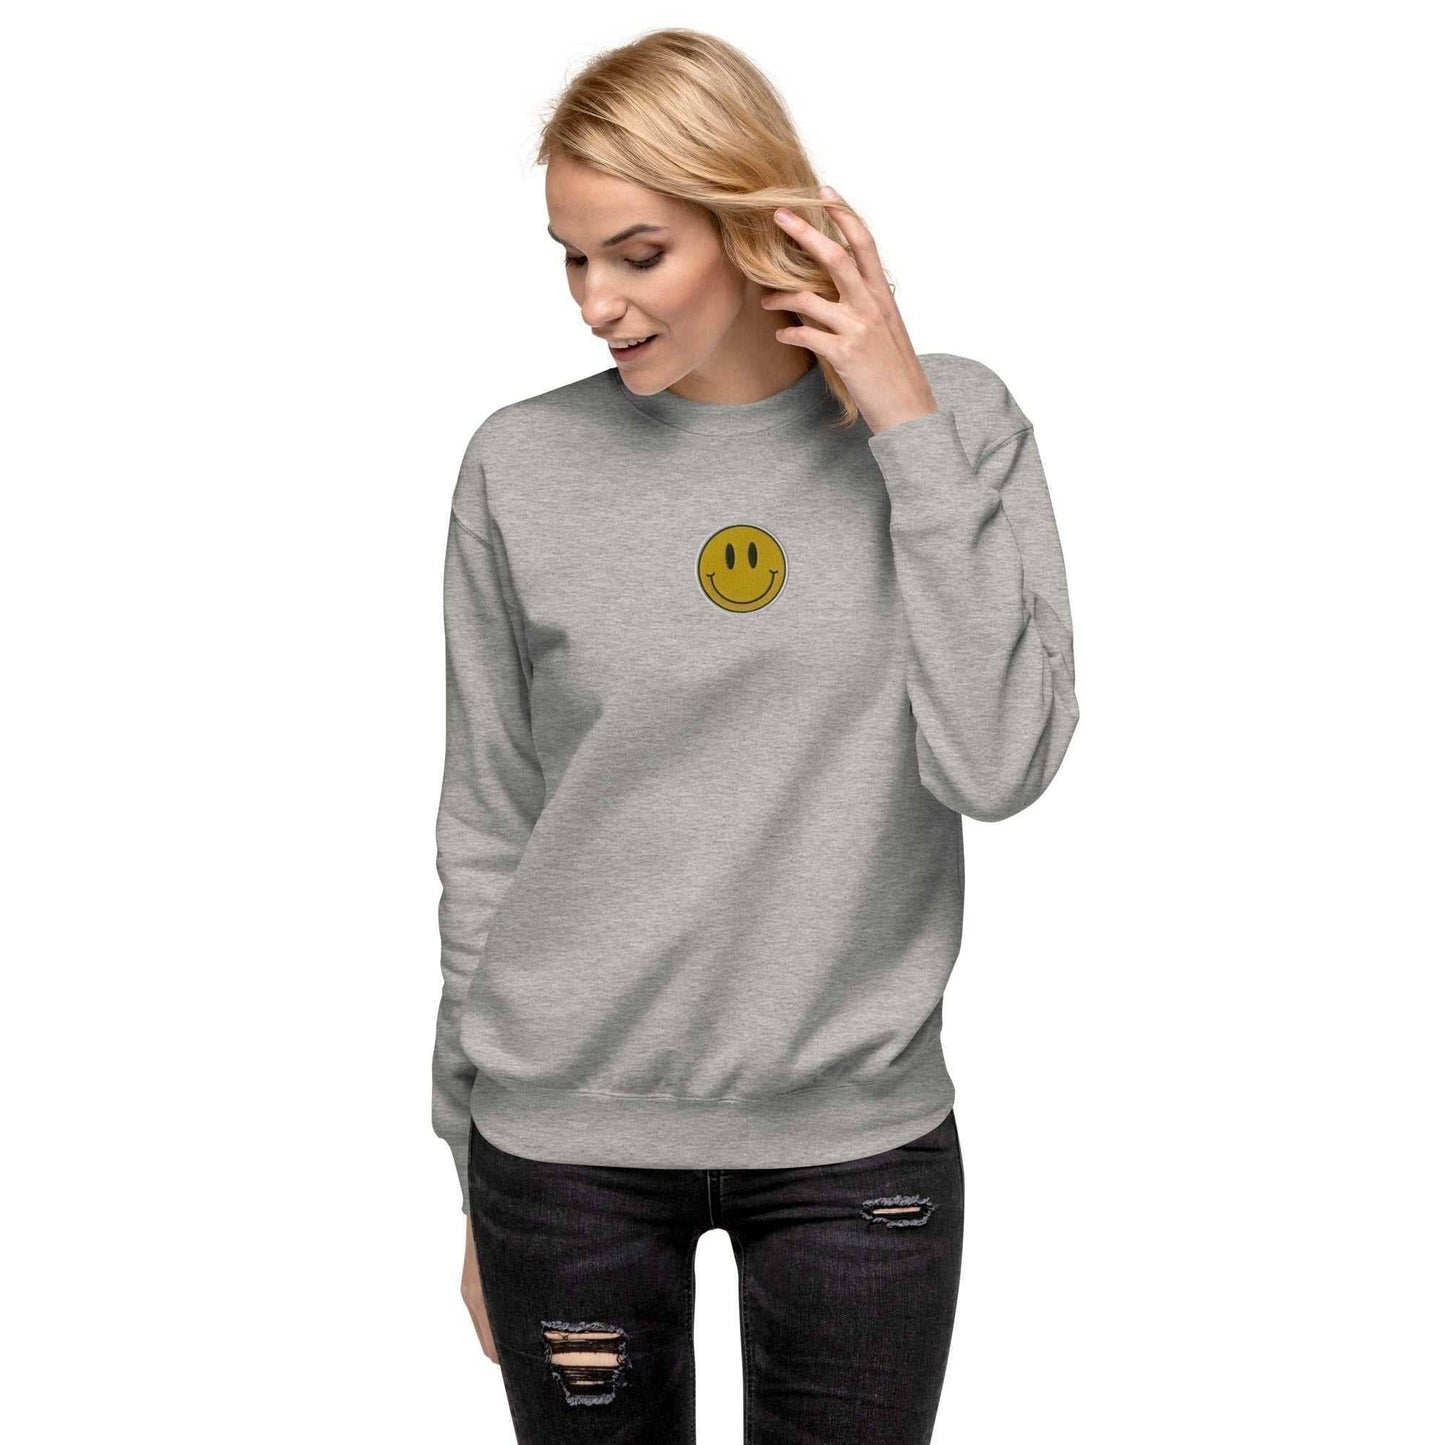 You Should Smile More Embroidered Sweatshirt Carbon Grey